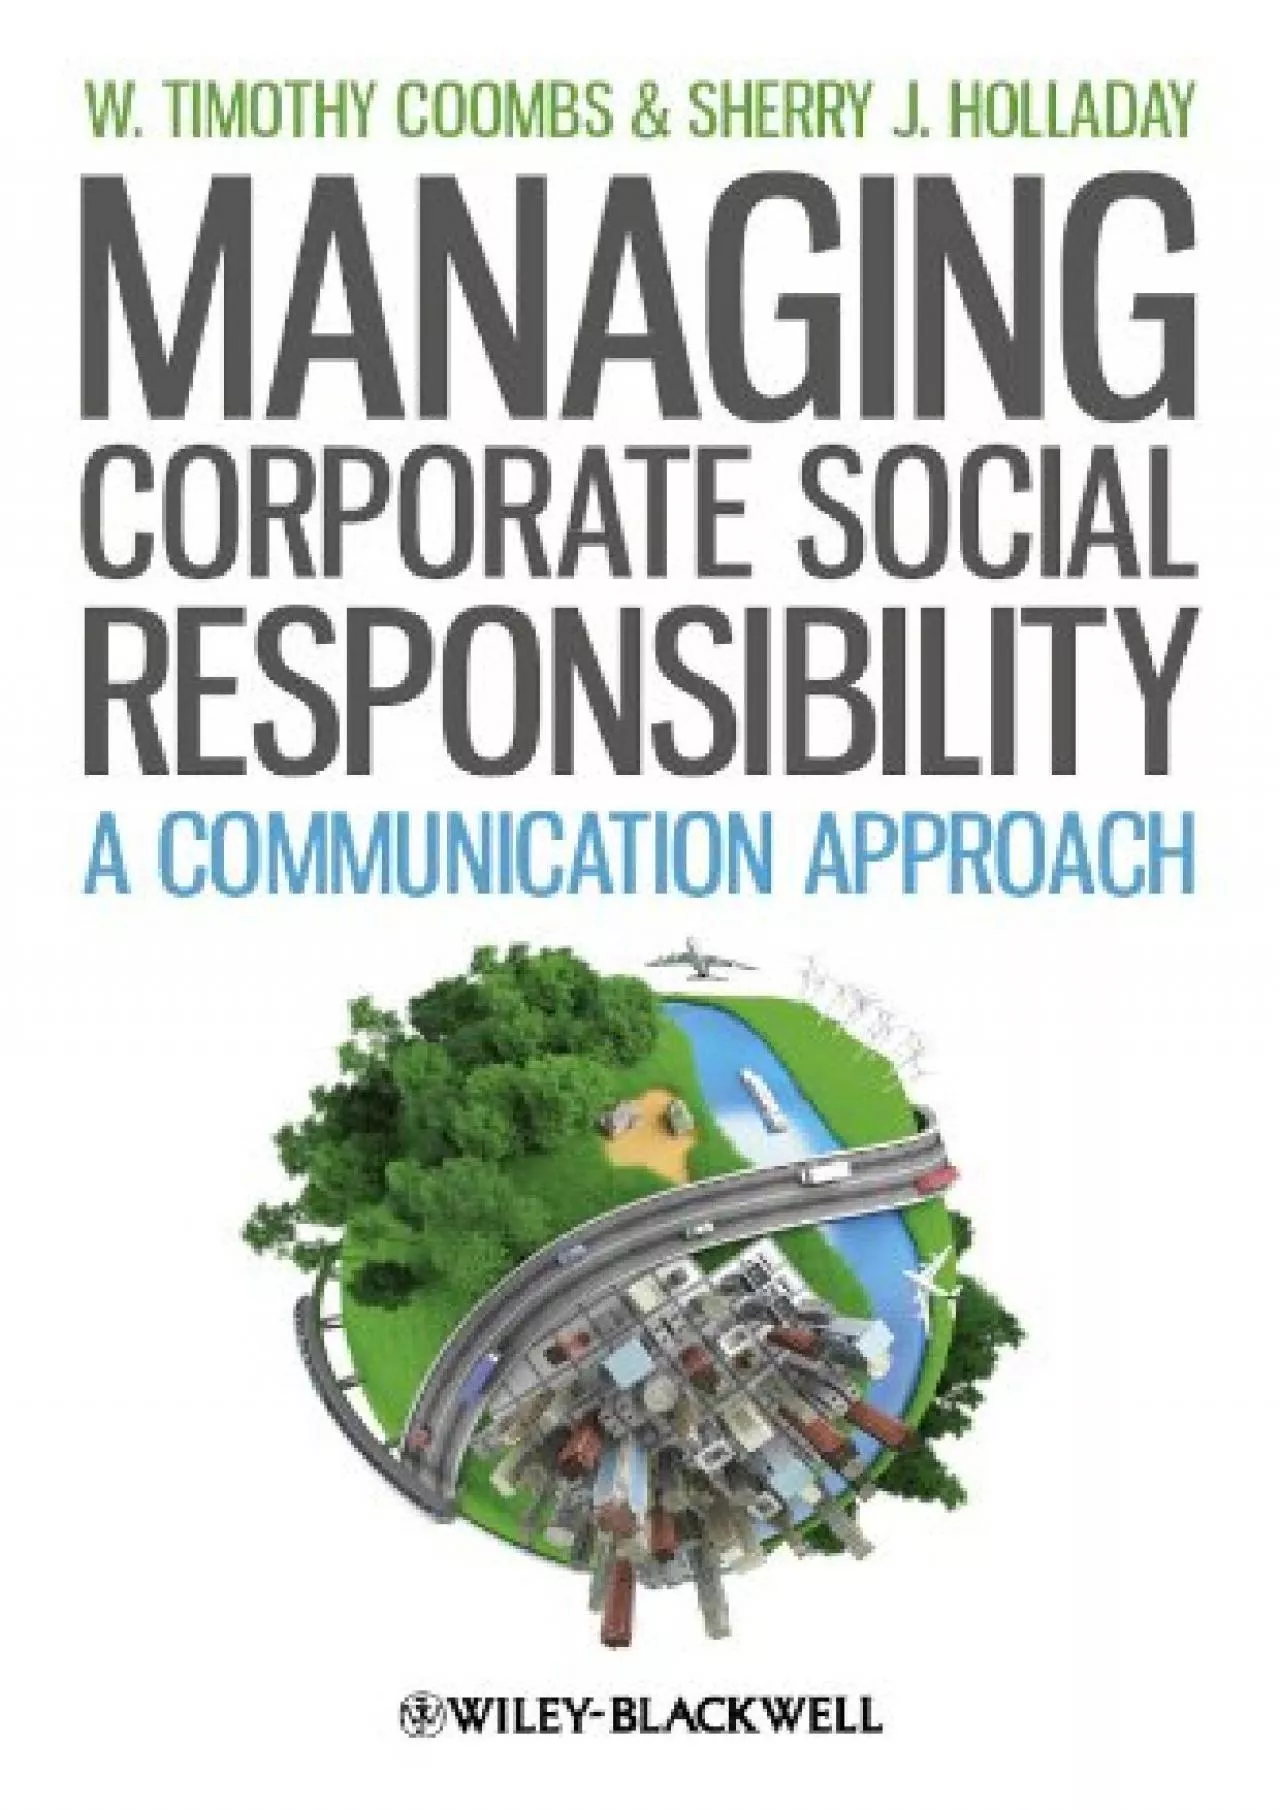 (DOWNLOAD)-Managing Corporate Social Responsibility: A Communication Approach